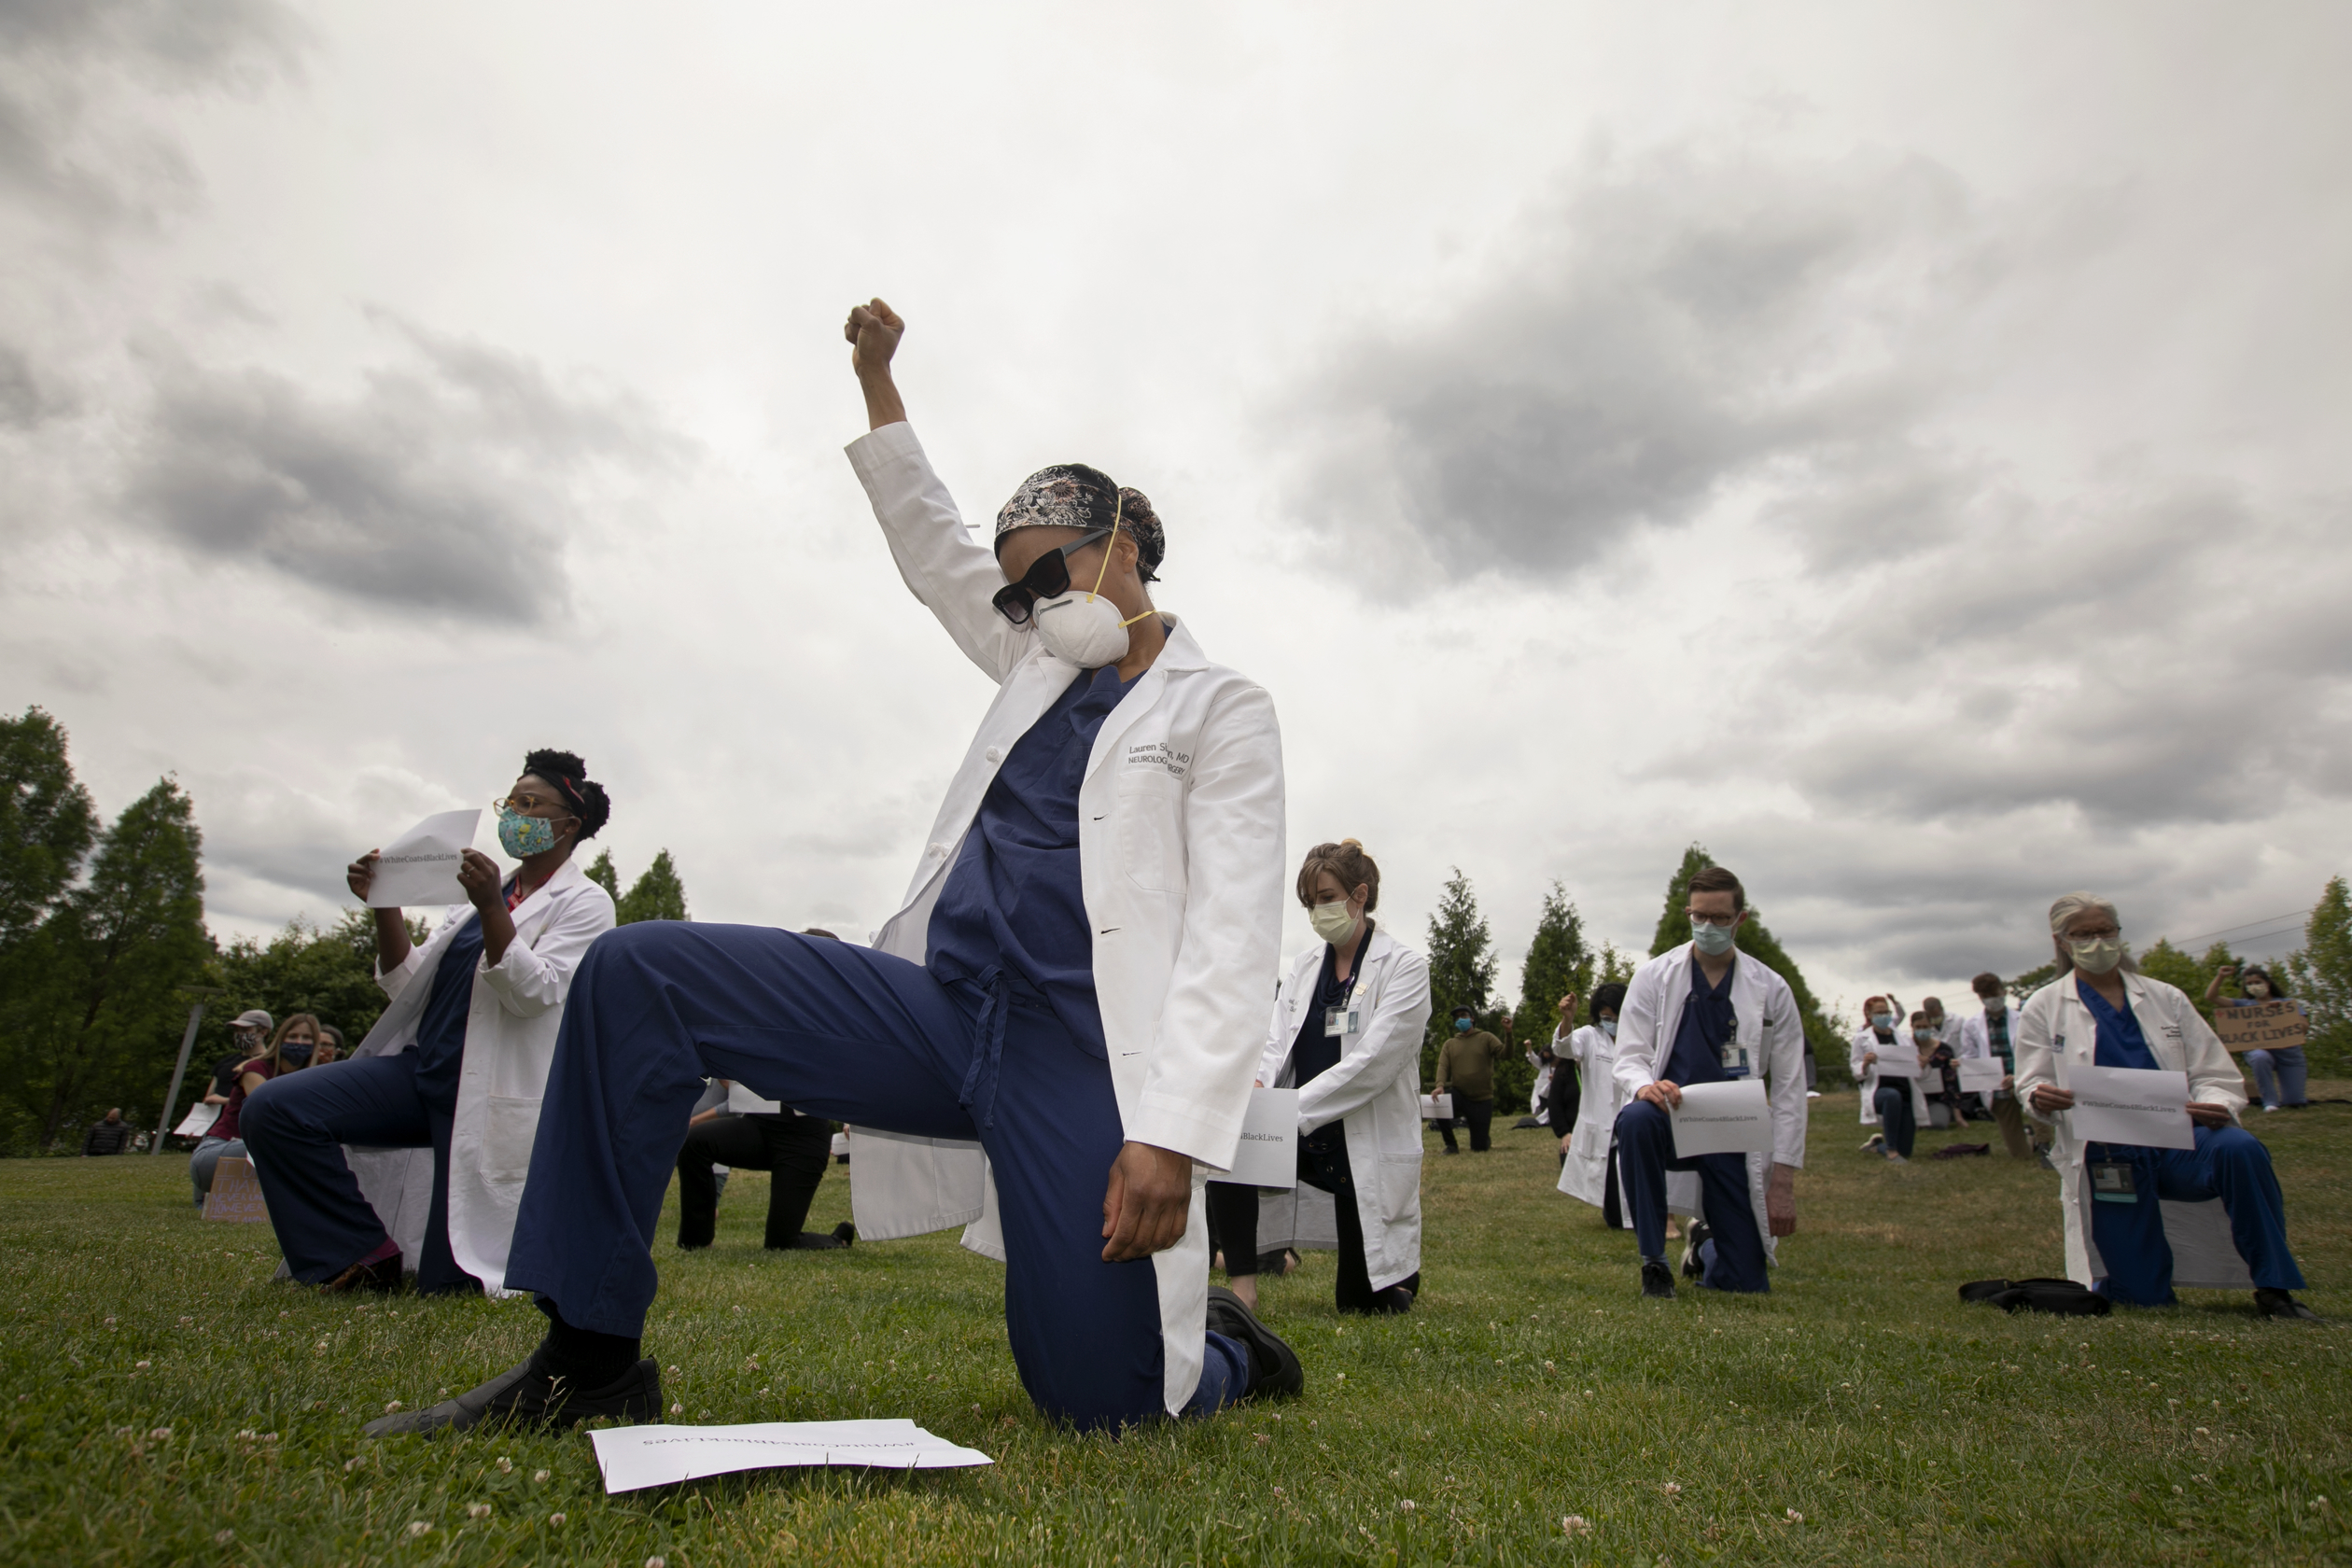 People kneeling at the White Coats 4 Black Lives Event in June 2020.